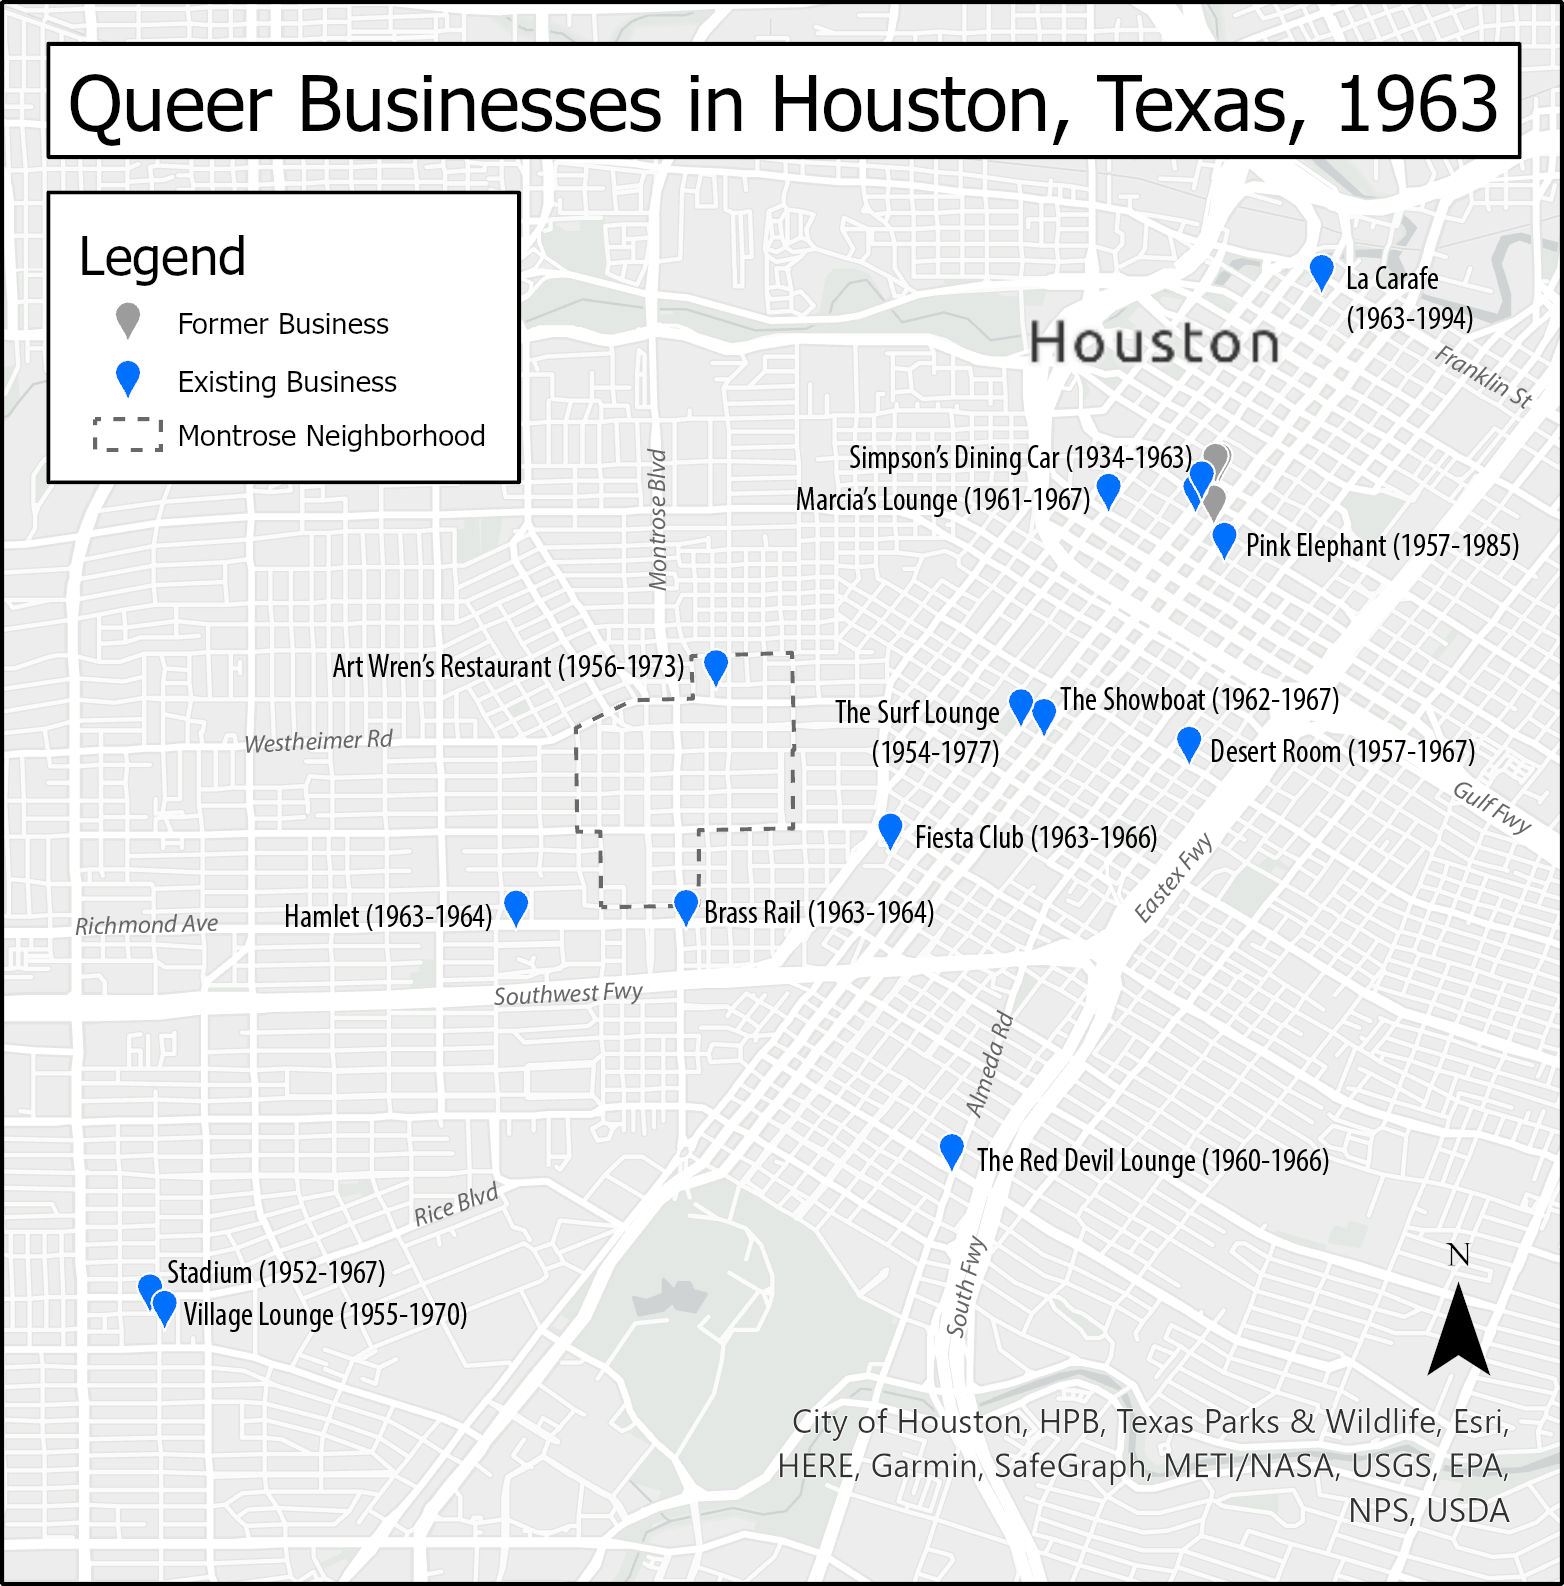 Queer businesses in Houston, Texas, 1963. 